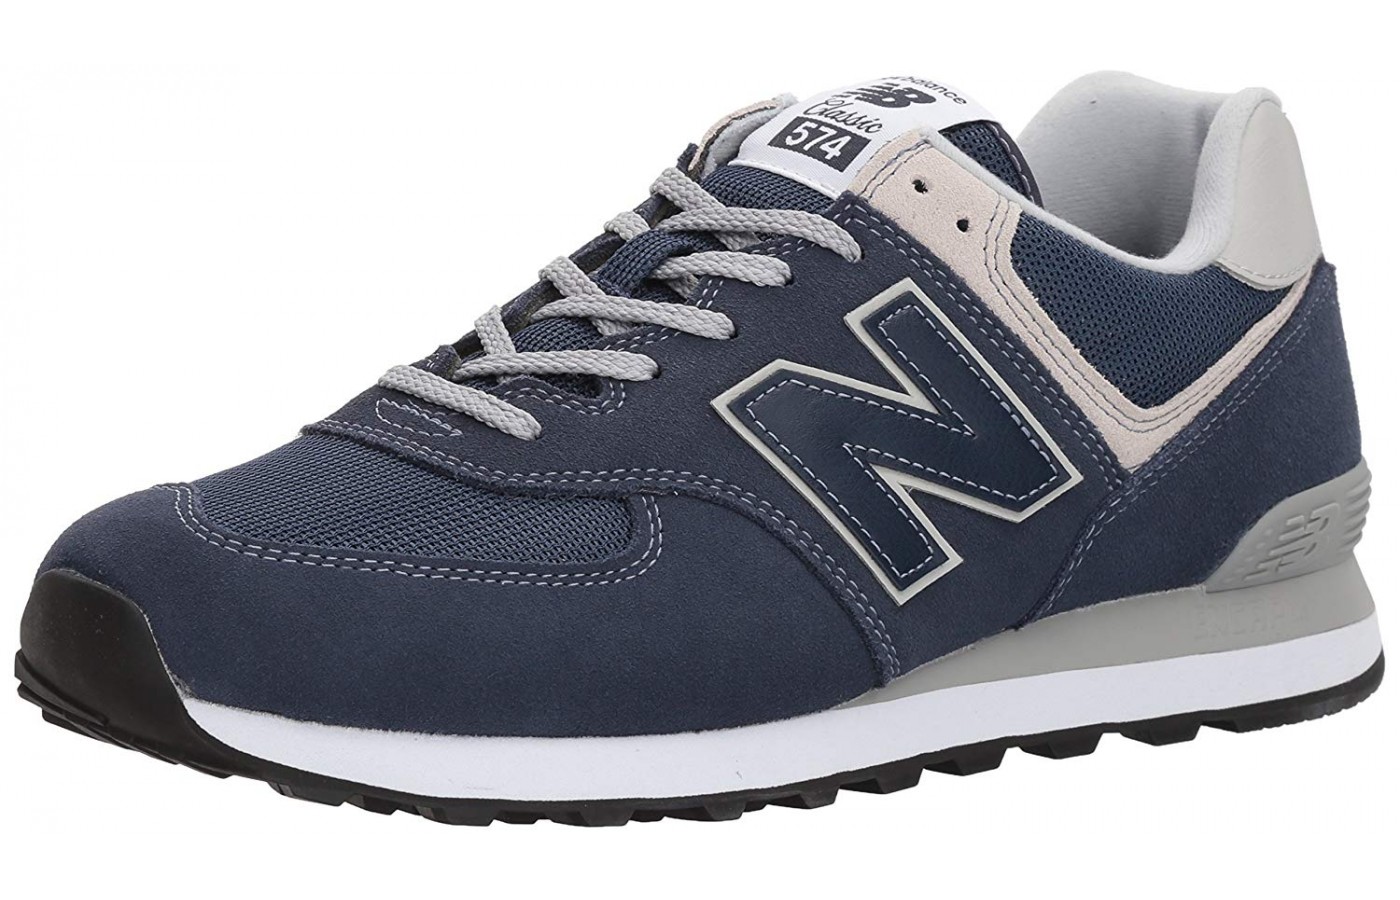 Purchase > nb 574v2, Up to 79% OFF